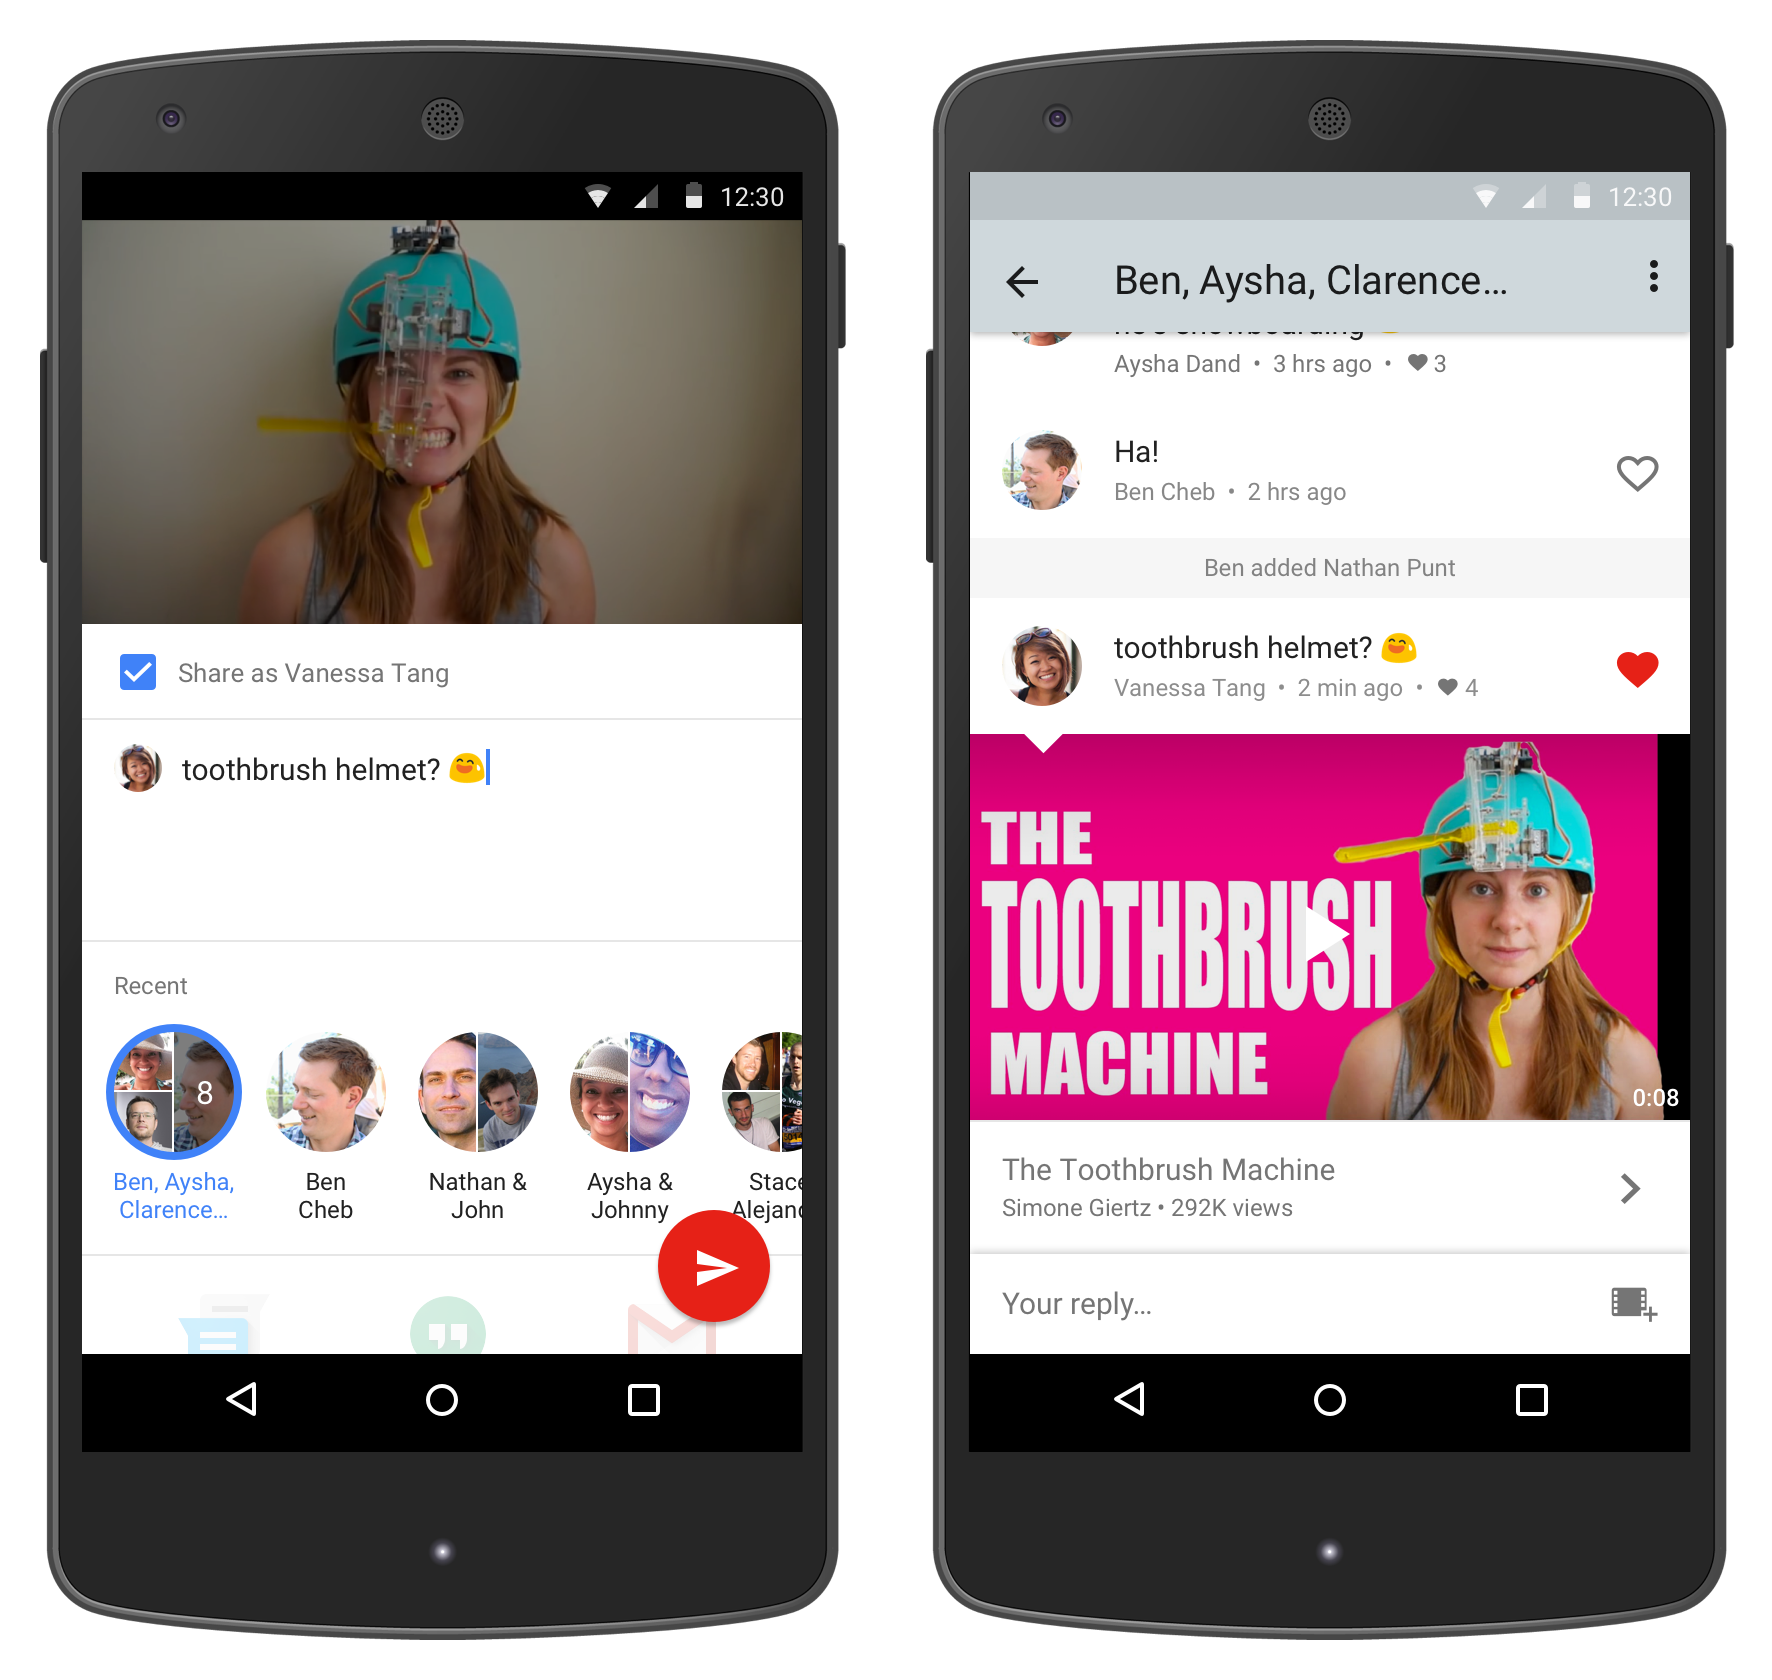 YouTube Adding A Messaging Tool To Its Mobile Apps